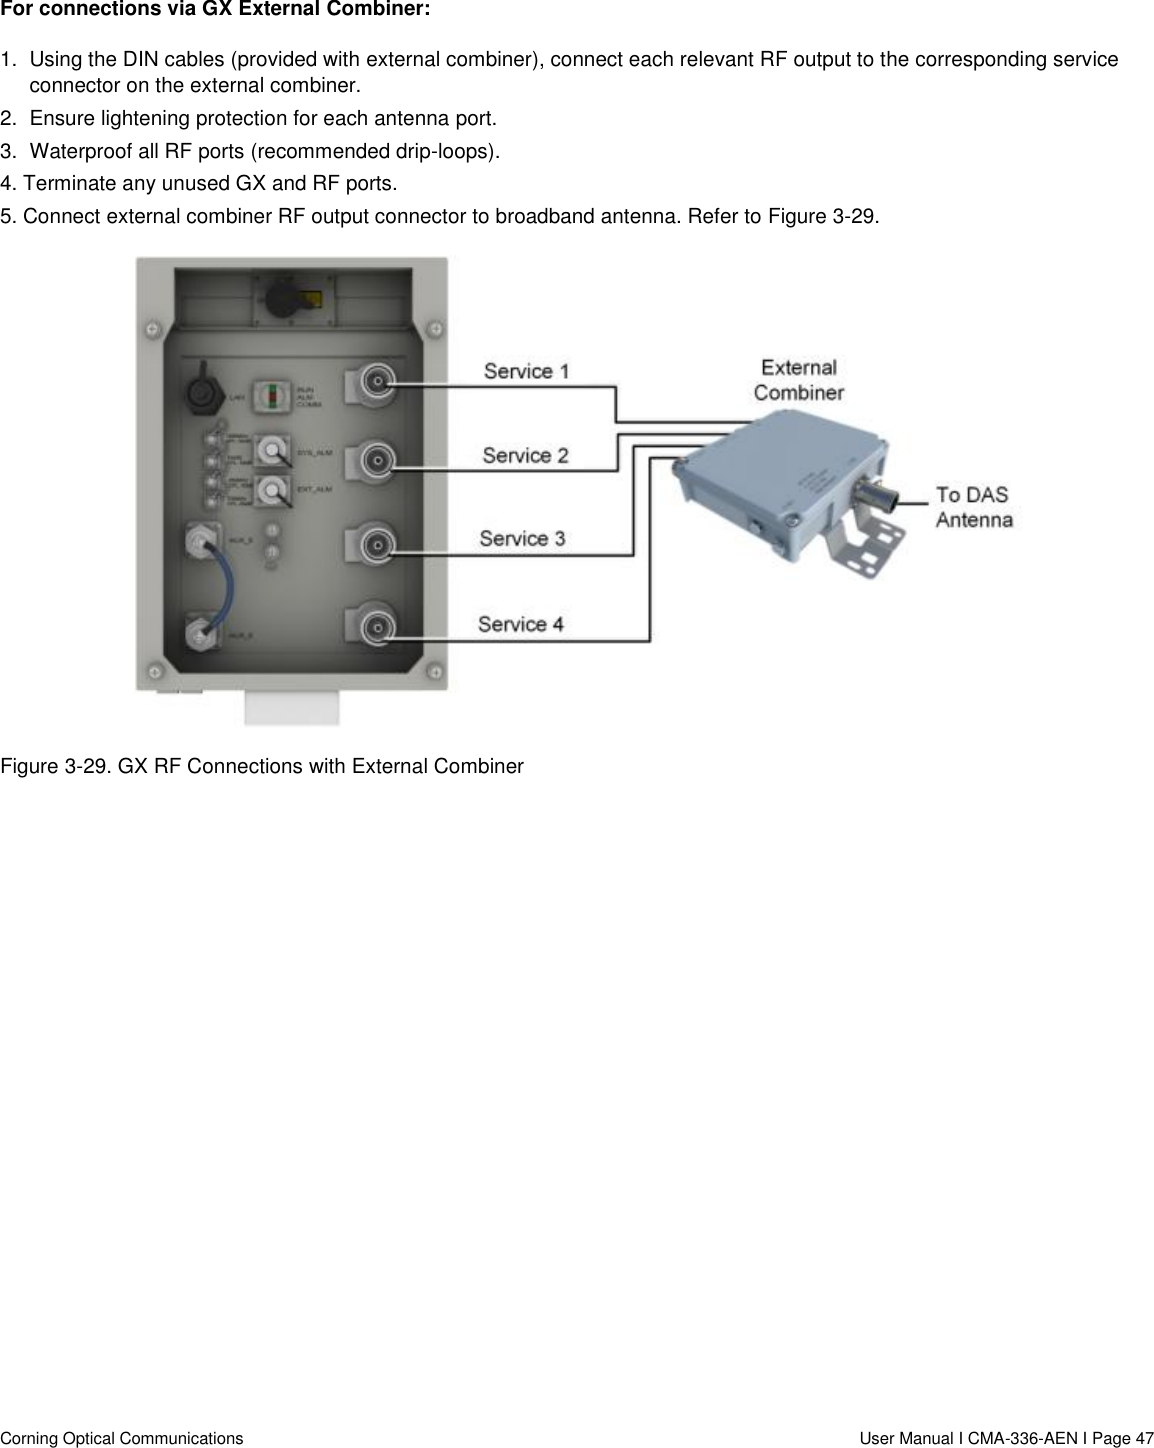   Corning Optical Communications                  User Manual I CMA-336-AEN I Page 47 For connections via GX External Combiner: 1.  Using the DIN cables (provided with external combiner), connect each relevant RF output to the corresponding service connector on the external combiner. 2.  Ensure lightening protection for each antenna port. 3.  Waterproof all RF ports (recommended drip-loops). 4. Terminate any unused GX and RF ports. 5. Connect external combiner RF output connector to broadband antenna. Refer to Figure 3-29.  Figure 3-29. GX RF Connections with External Combiner      